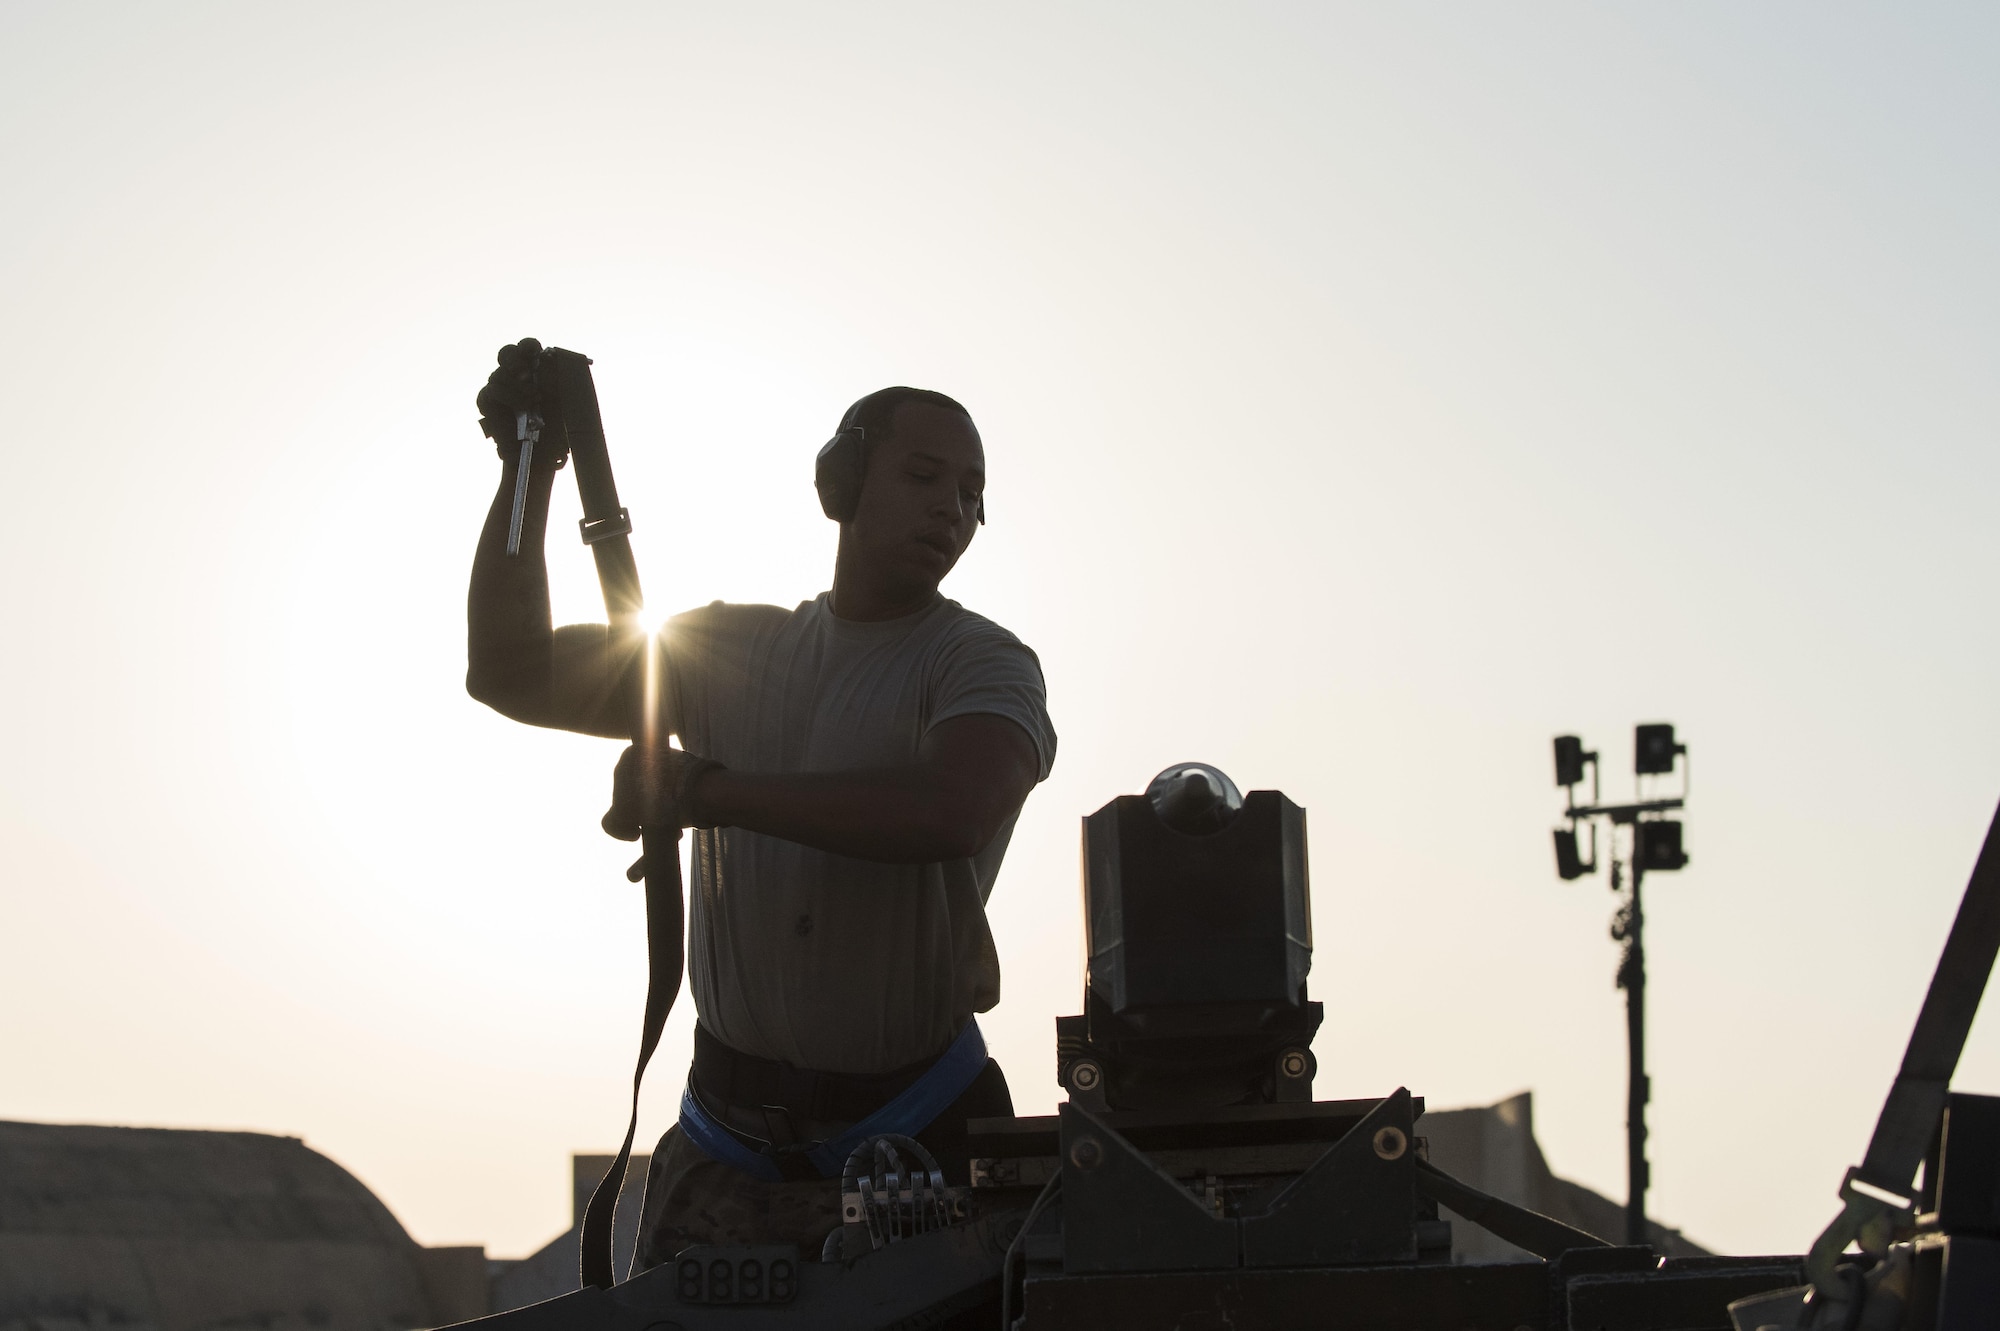 Tech. Sgt. Keith Rochford, 332nd Expeditionary Maintenance Squadron weapons load crew chief, secures a bomb to a lift truck before loading it on an F-15E Strike Eagle, August 13, 2017, in Southwest Asia. Due to the size and weight of the bombs, they must be loaded using a lift truck to prevent injuries and damage to the munitions. (U.S. Air Force photo/Senior Airman Damon Kasberg)